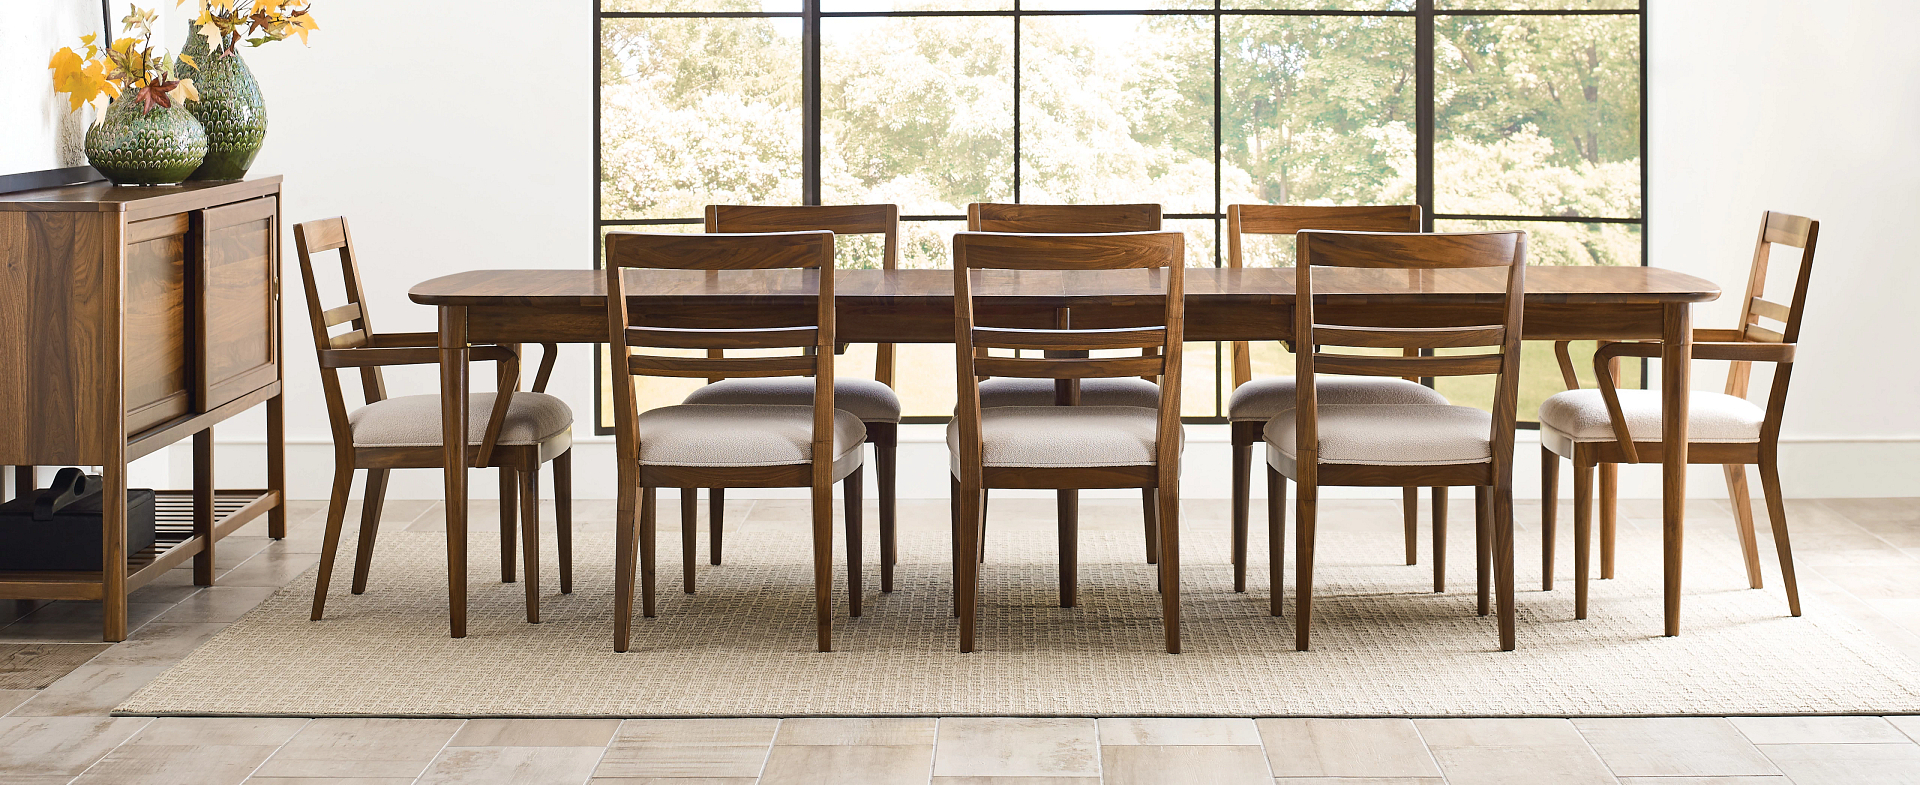 Monogram Walnut Dining Table and Chairs